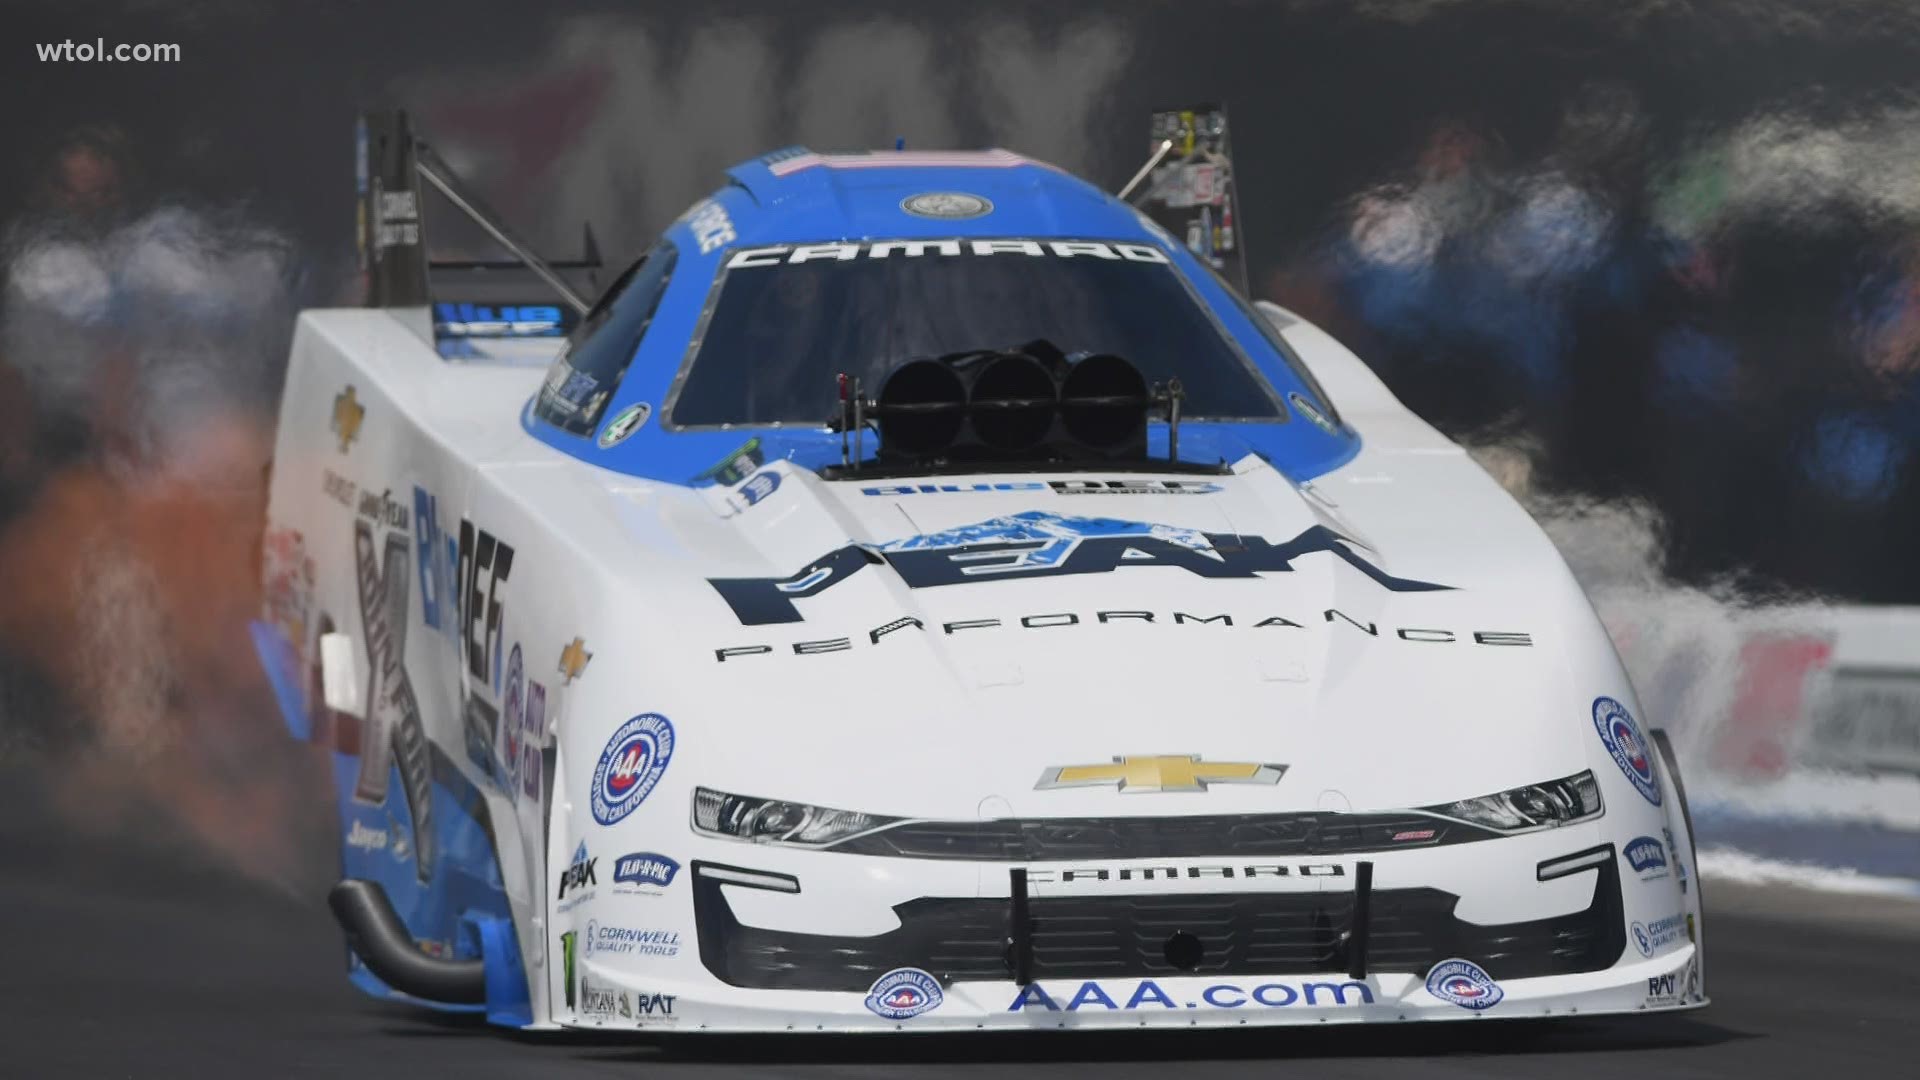 If you're looking for some weekend entertainment, the NHRA Camping World drag racing series is coming to Northwest Ohio featuring legends such as John Force.